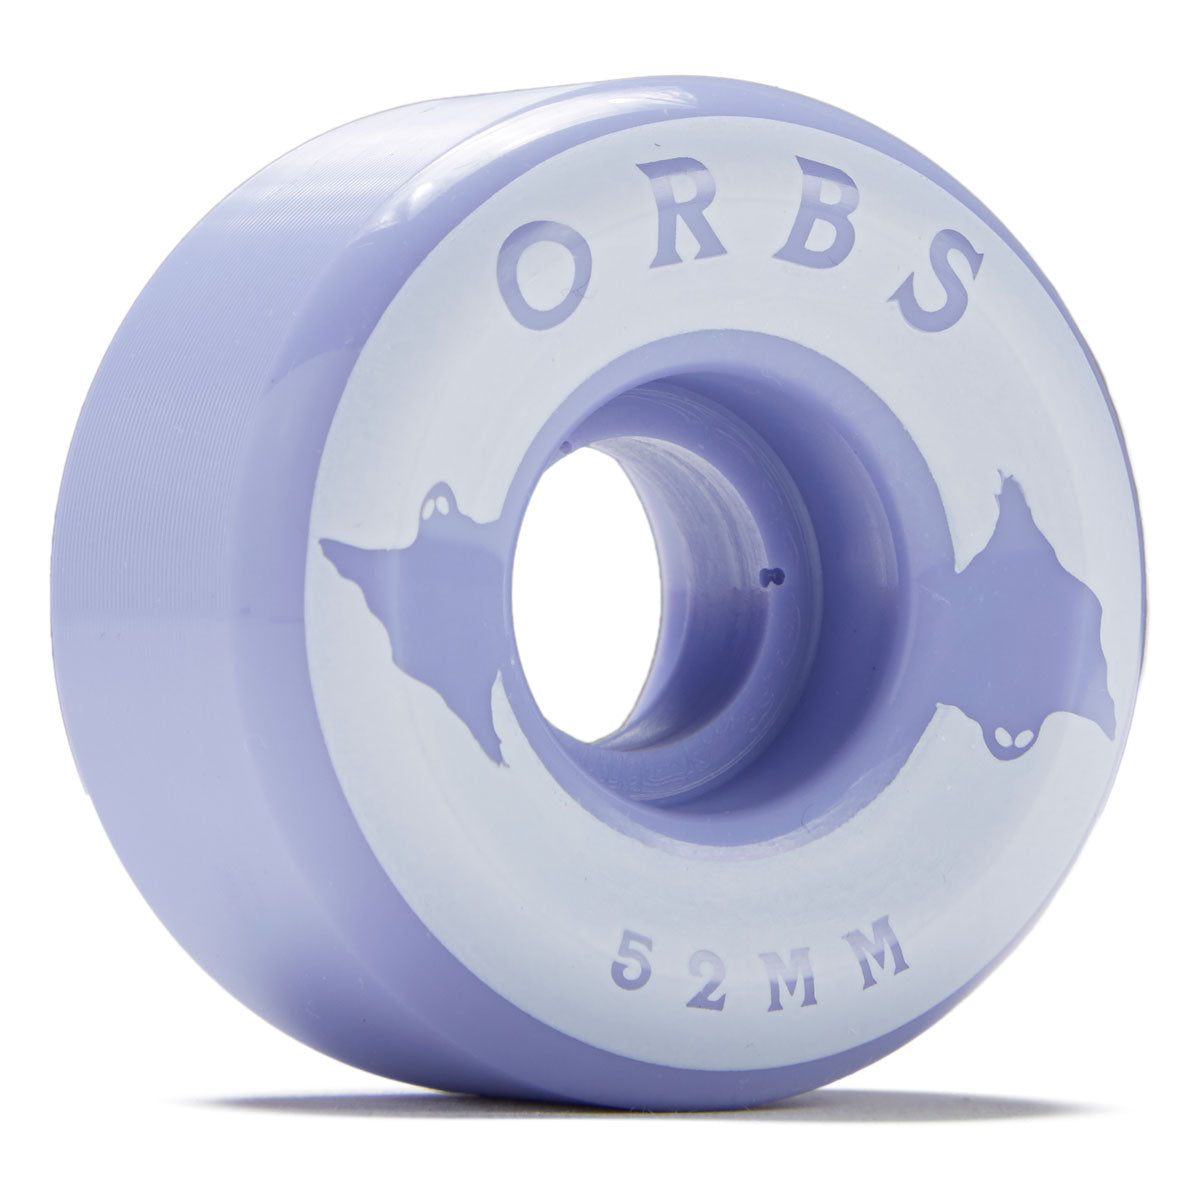 Welcome Orbs Specters 99A Skateboard Wheels - Lavender - 52mm image 1